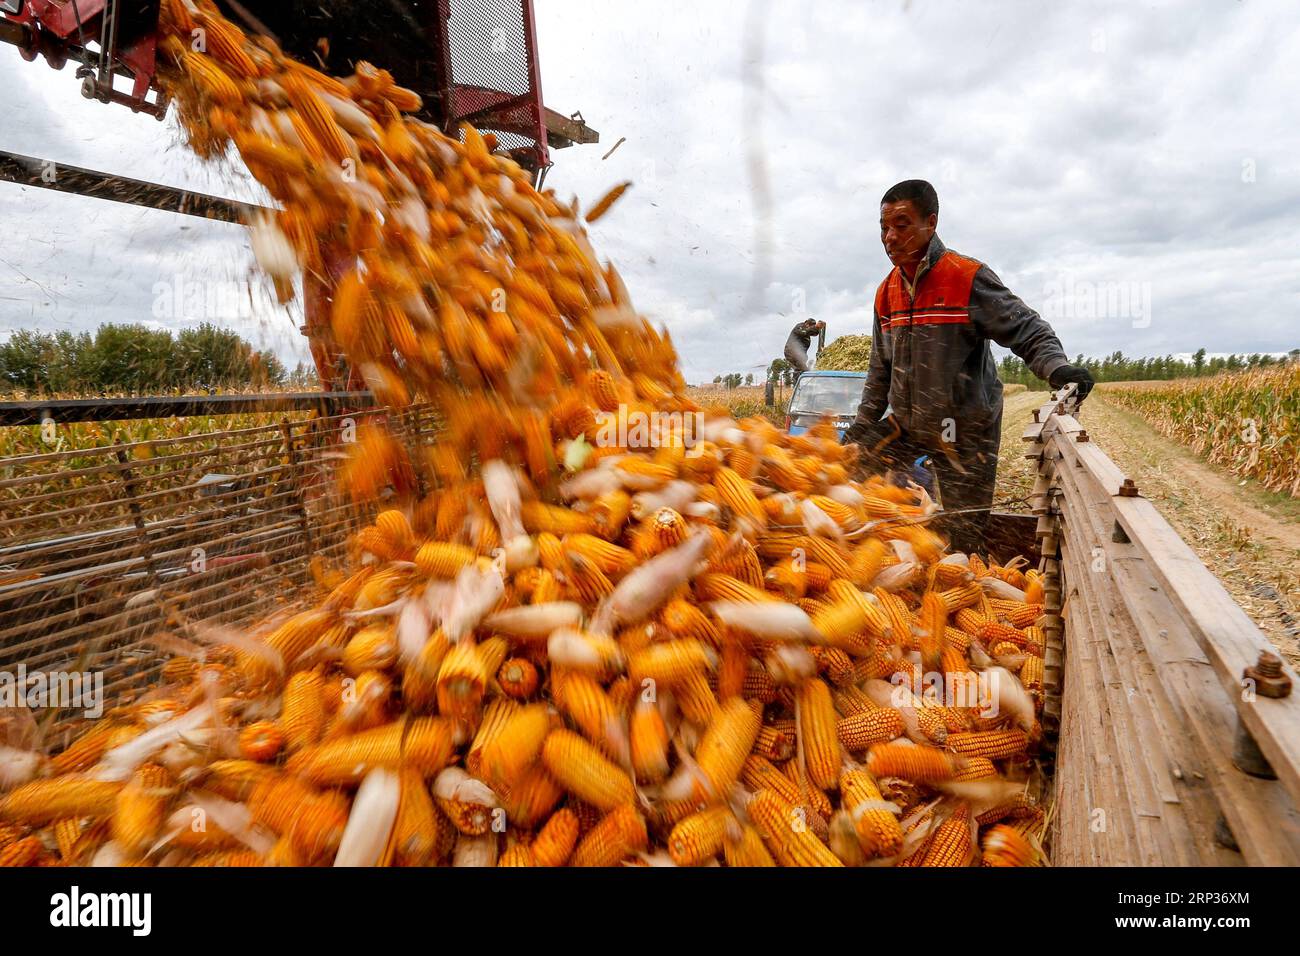 (180922) -- AOHAN BANNER, Sept. 22, 2018 -- A villager loads harvested corn ears onto a truck in Beisanjia Village of Aohan Banner in north China s Inner Mongolia Autonomous Region, Sept. 22, 2018. China will mark its first Farmers Harvest Festival on Sept. 23 this year. From 2018 on, the festival, to be celebrated on the Autumnal Equinox each year, is set to be observed annually to greet the harvest season and honour the agricultural workers. ) (lmm) CHINA-AGRICULTURE-HARVEST (CN) YuxDongsheng PUBLICATIONxNOTxINxCHN Stock Photo